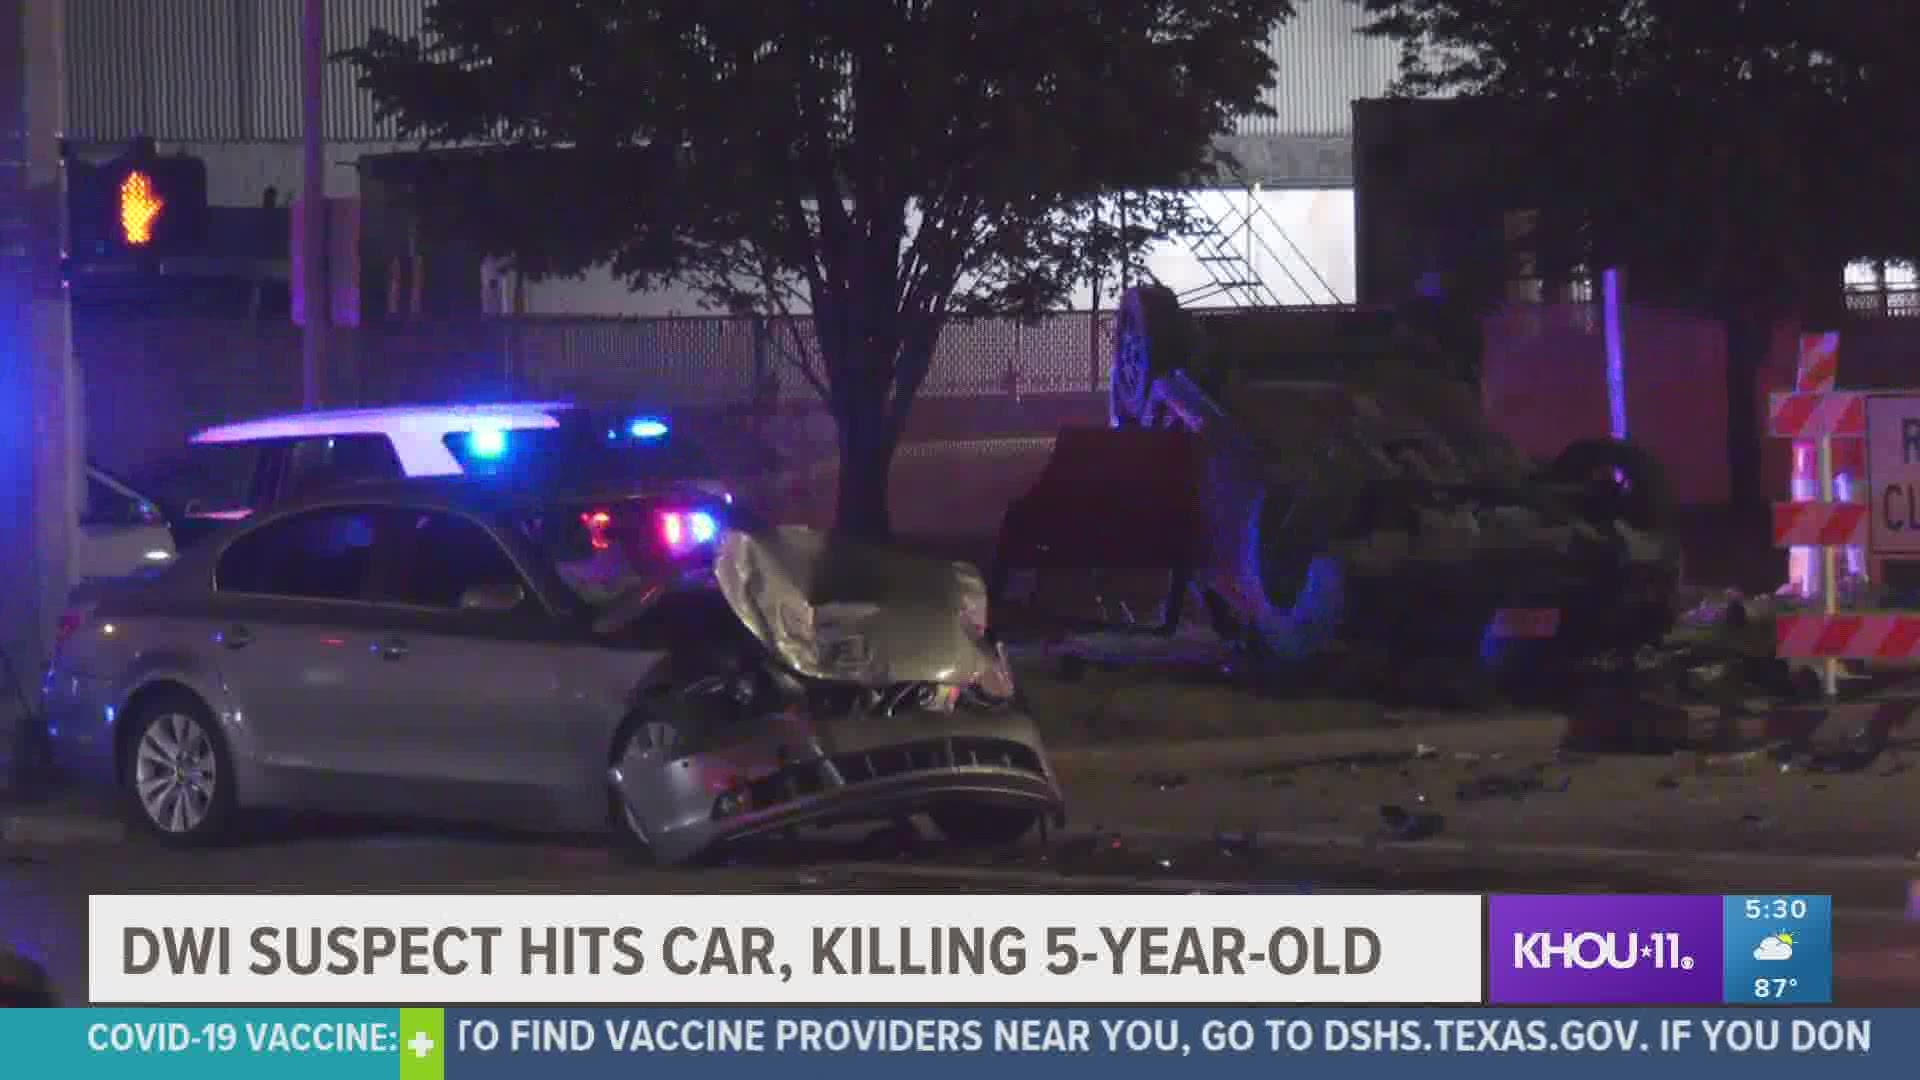 Good Samaritans helped police arrest a suspected intoxicated driver who allegedly caused a deadly rollover crash that killed a 5-year-old child.